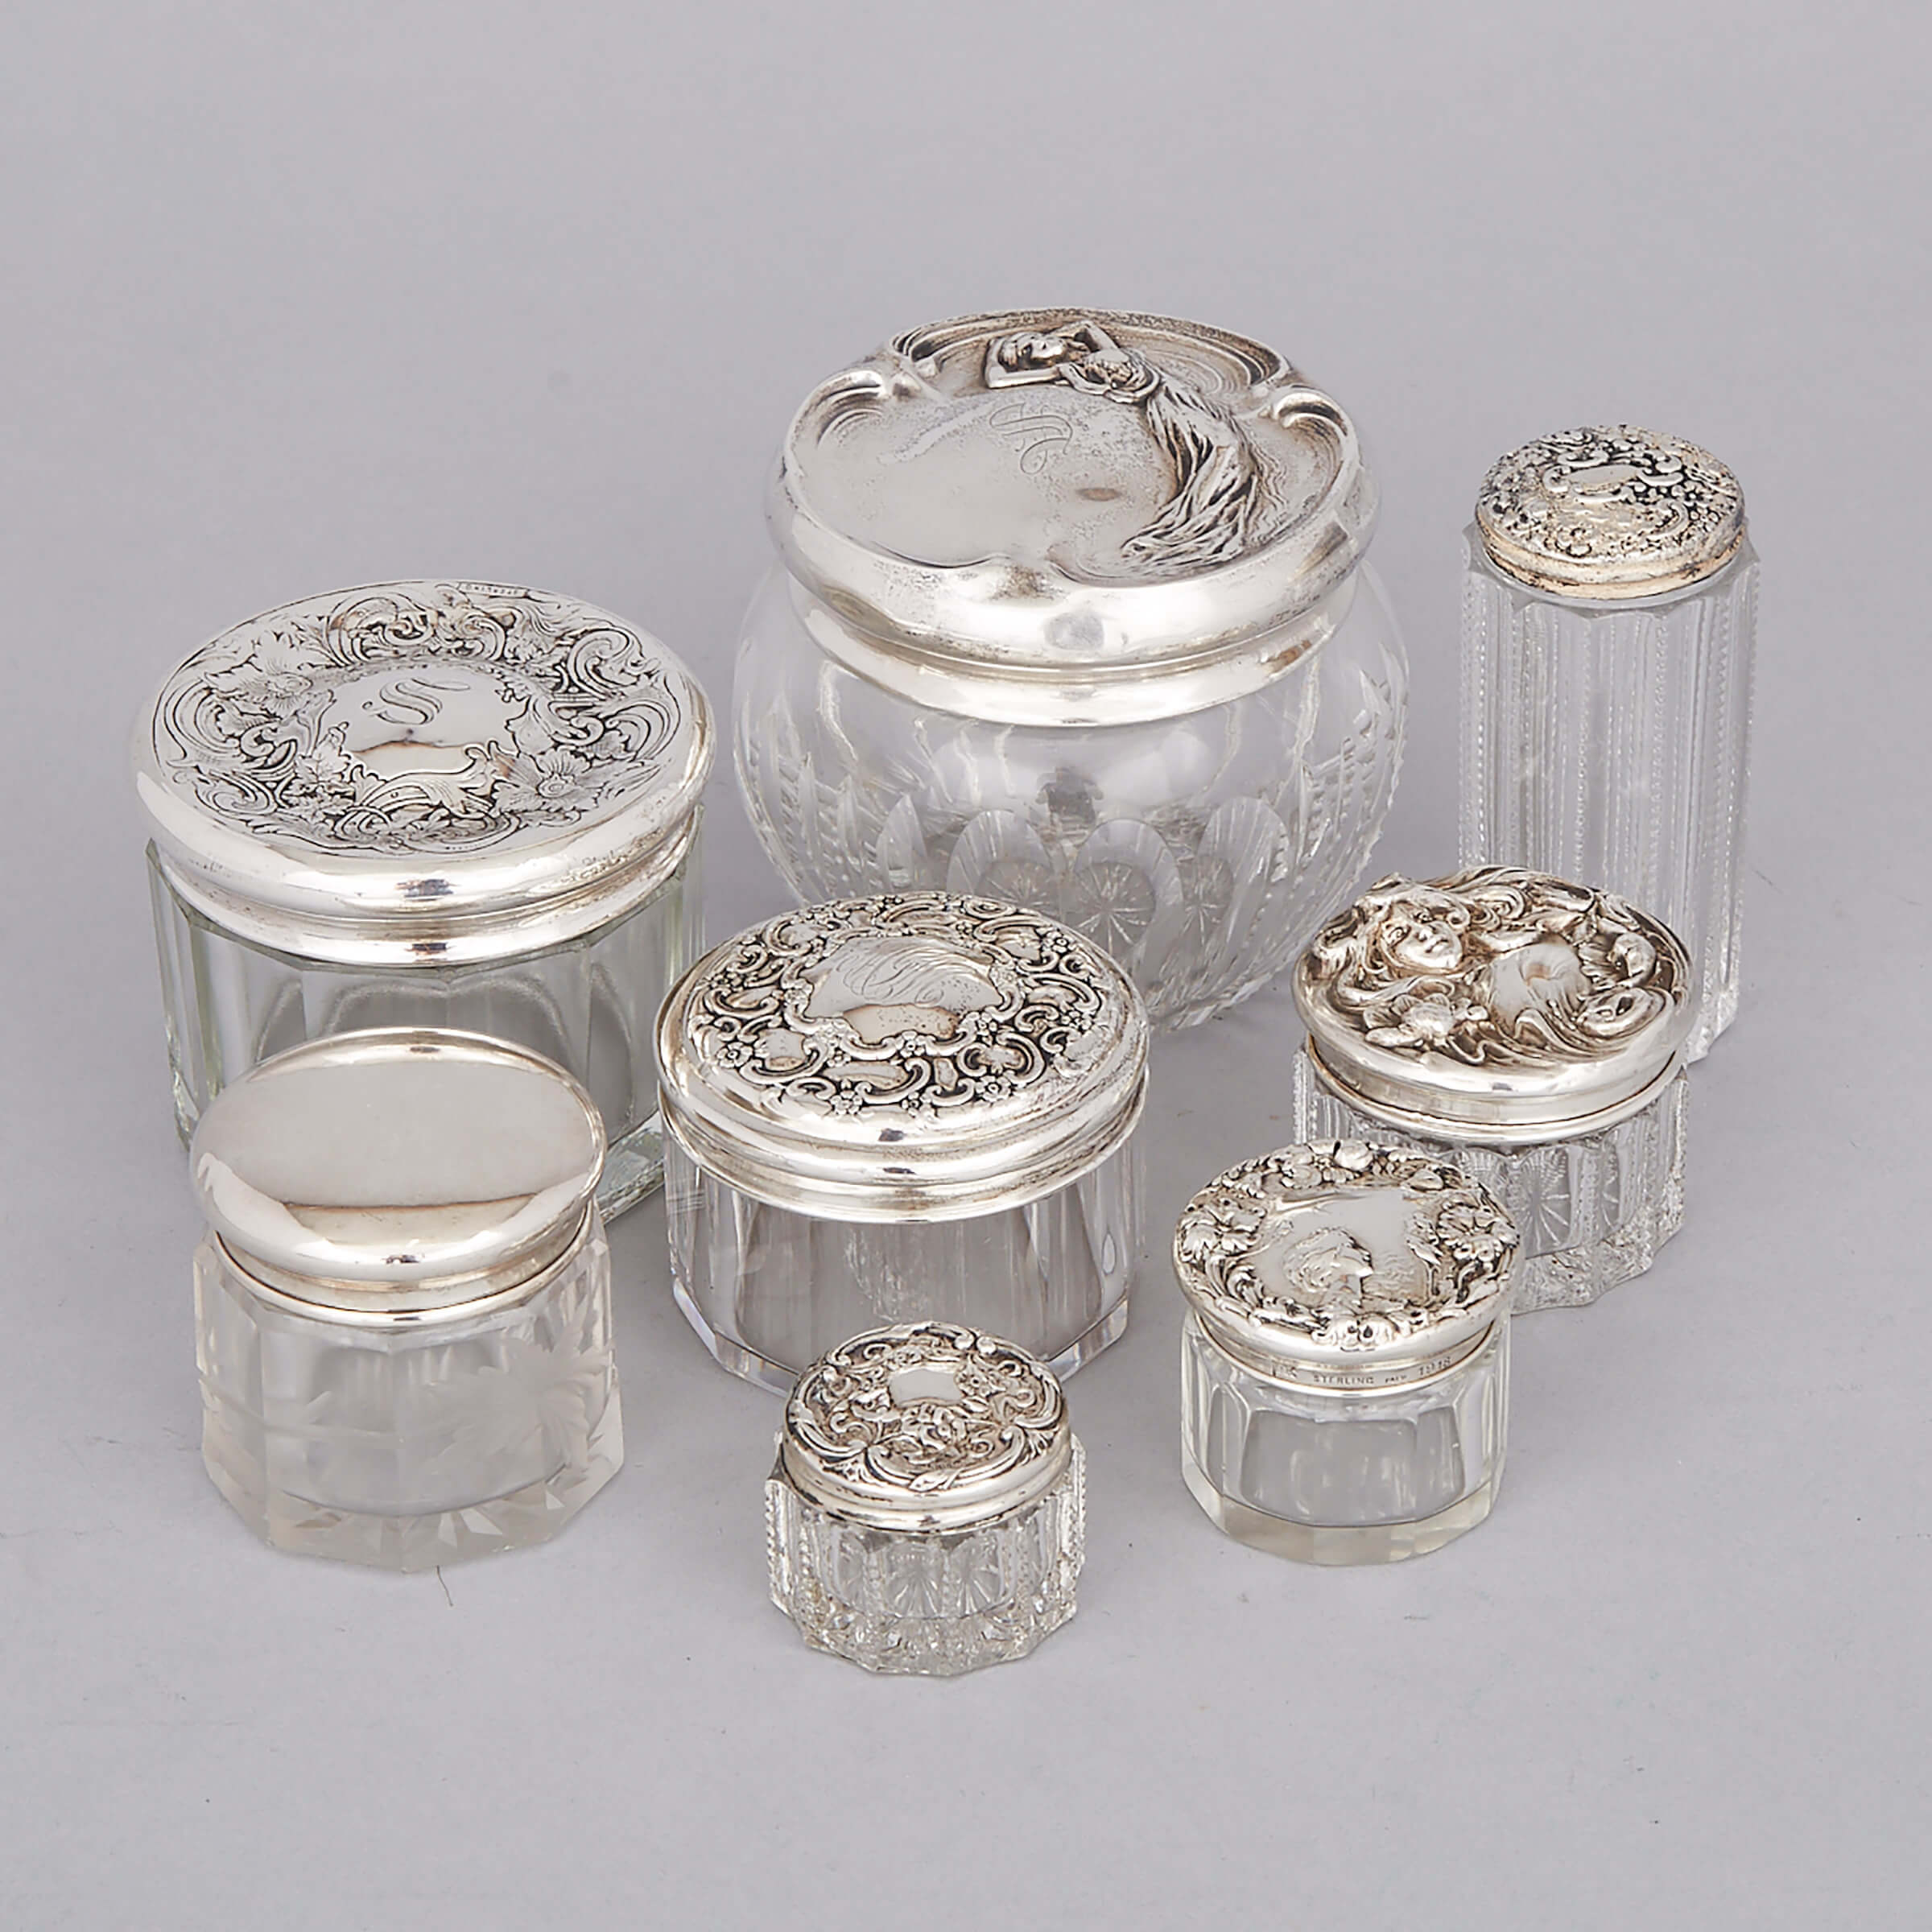 Eight North American Silver and Cut Glass Dressing Table Jars, c.1900-10